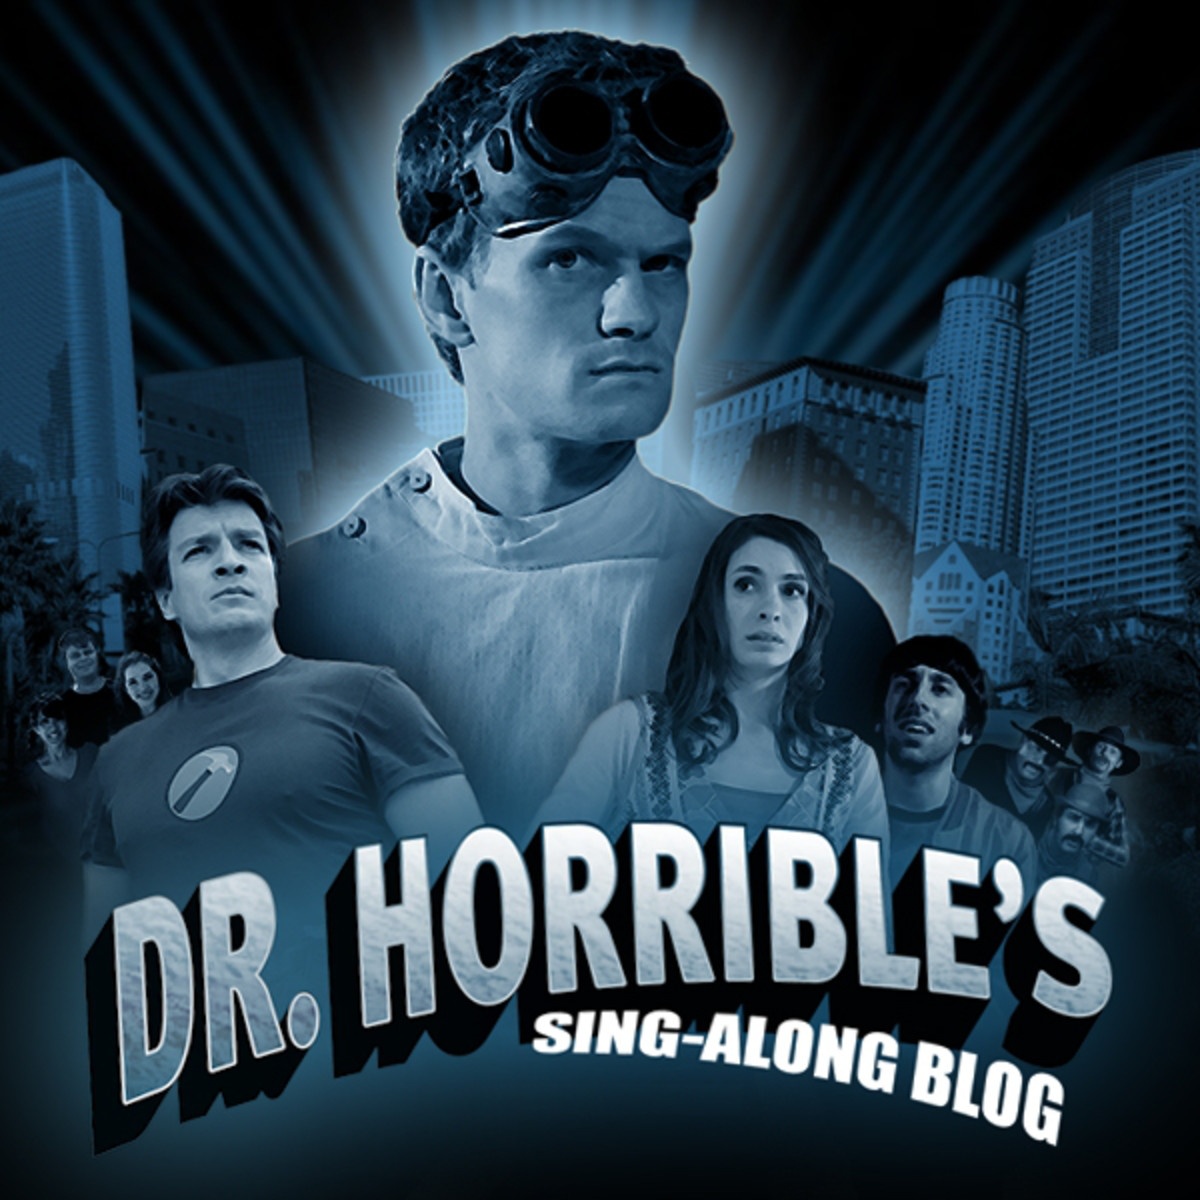 Dr. Horrible's Sing-Along Blog (Soundtrack from the Motion Picture)